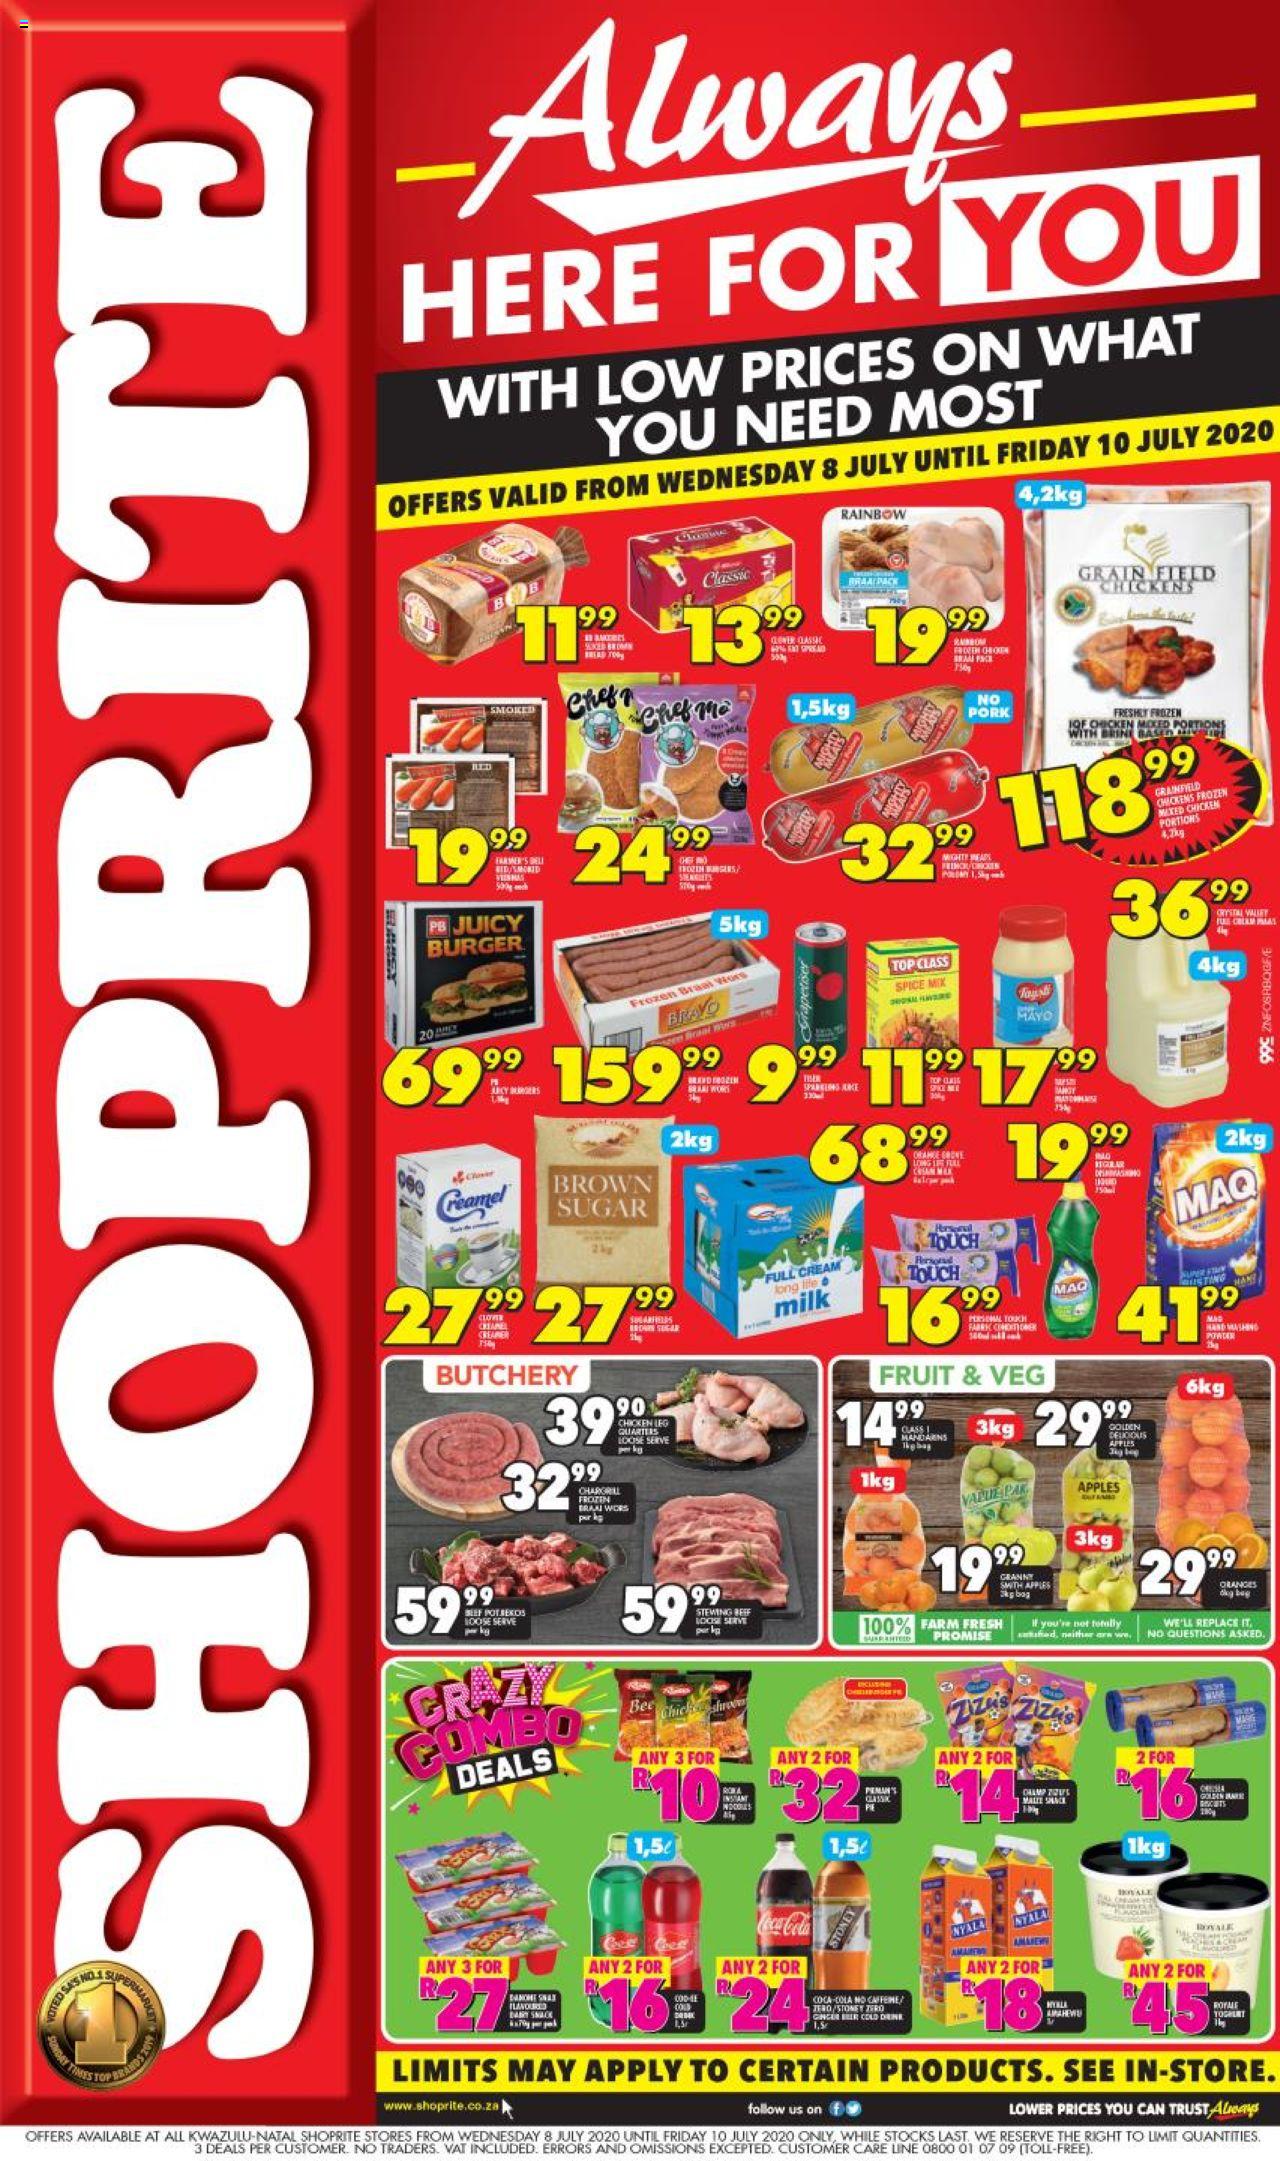 Shoprite Specials Always Here For You 8 July 2020